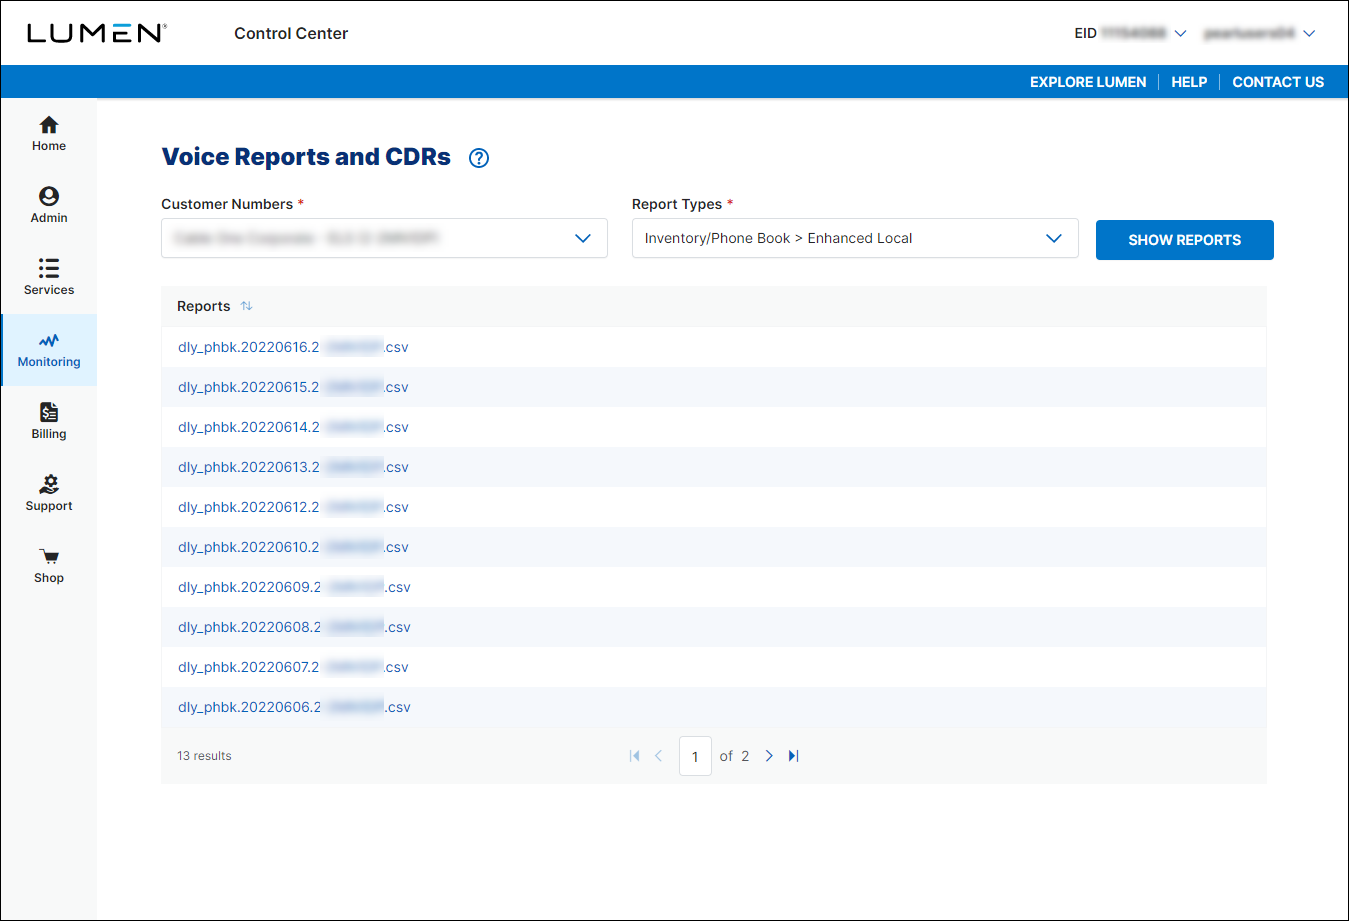 Voice Reports and CDRs (showing downloadable reports)